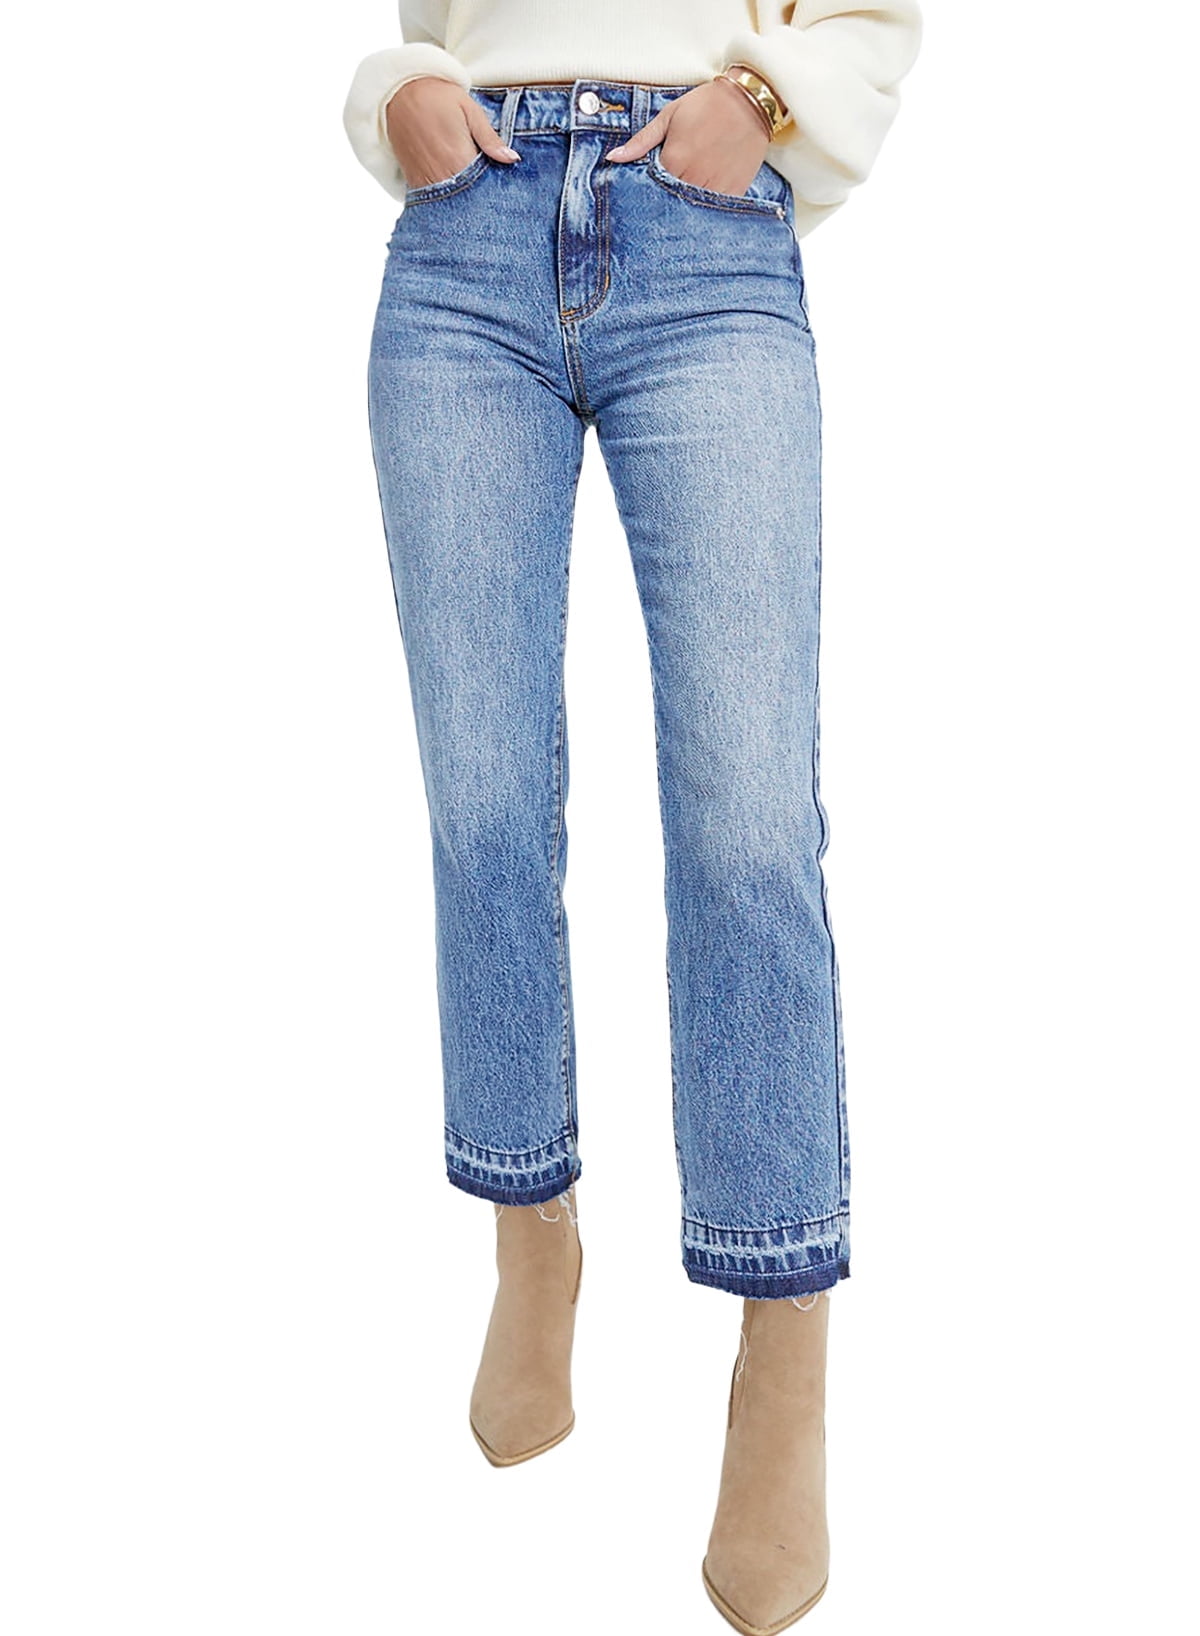 Dokotoo Cropped Jeans for Women Classic Basic Distressed Frayed Denim ...